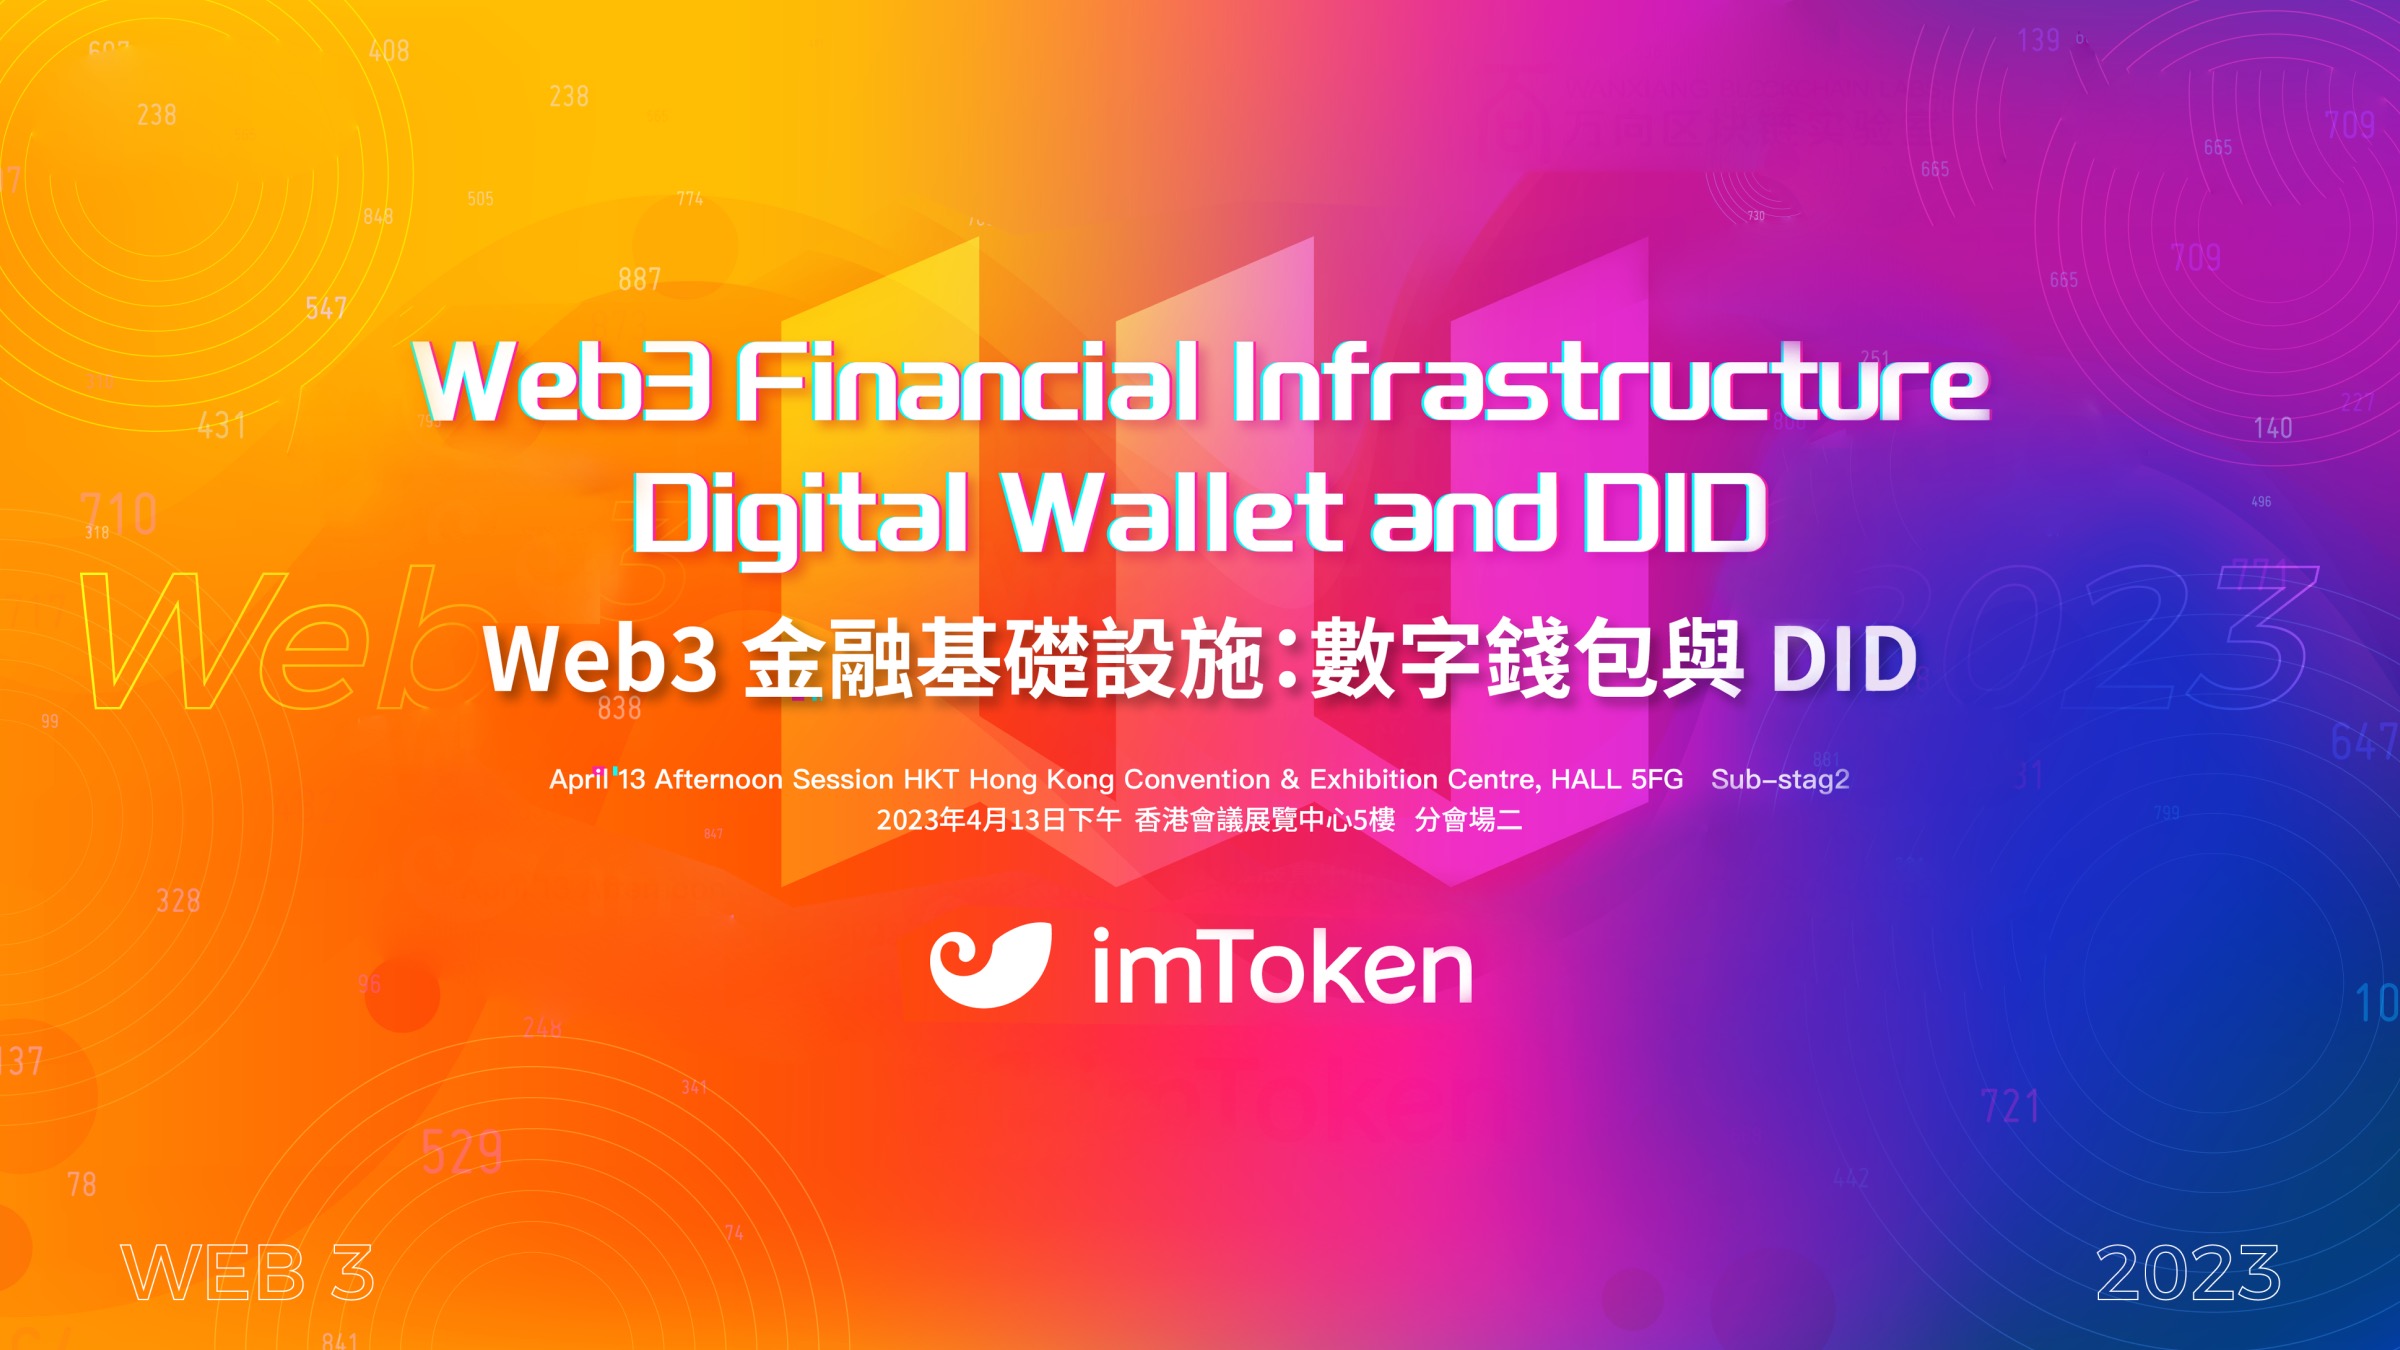 imToken to Participate in Hong Kong Web3 Festival, Co-hosting Wallet-themed Forum